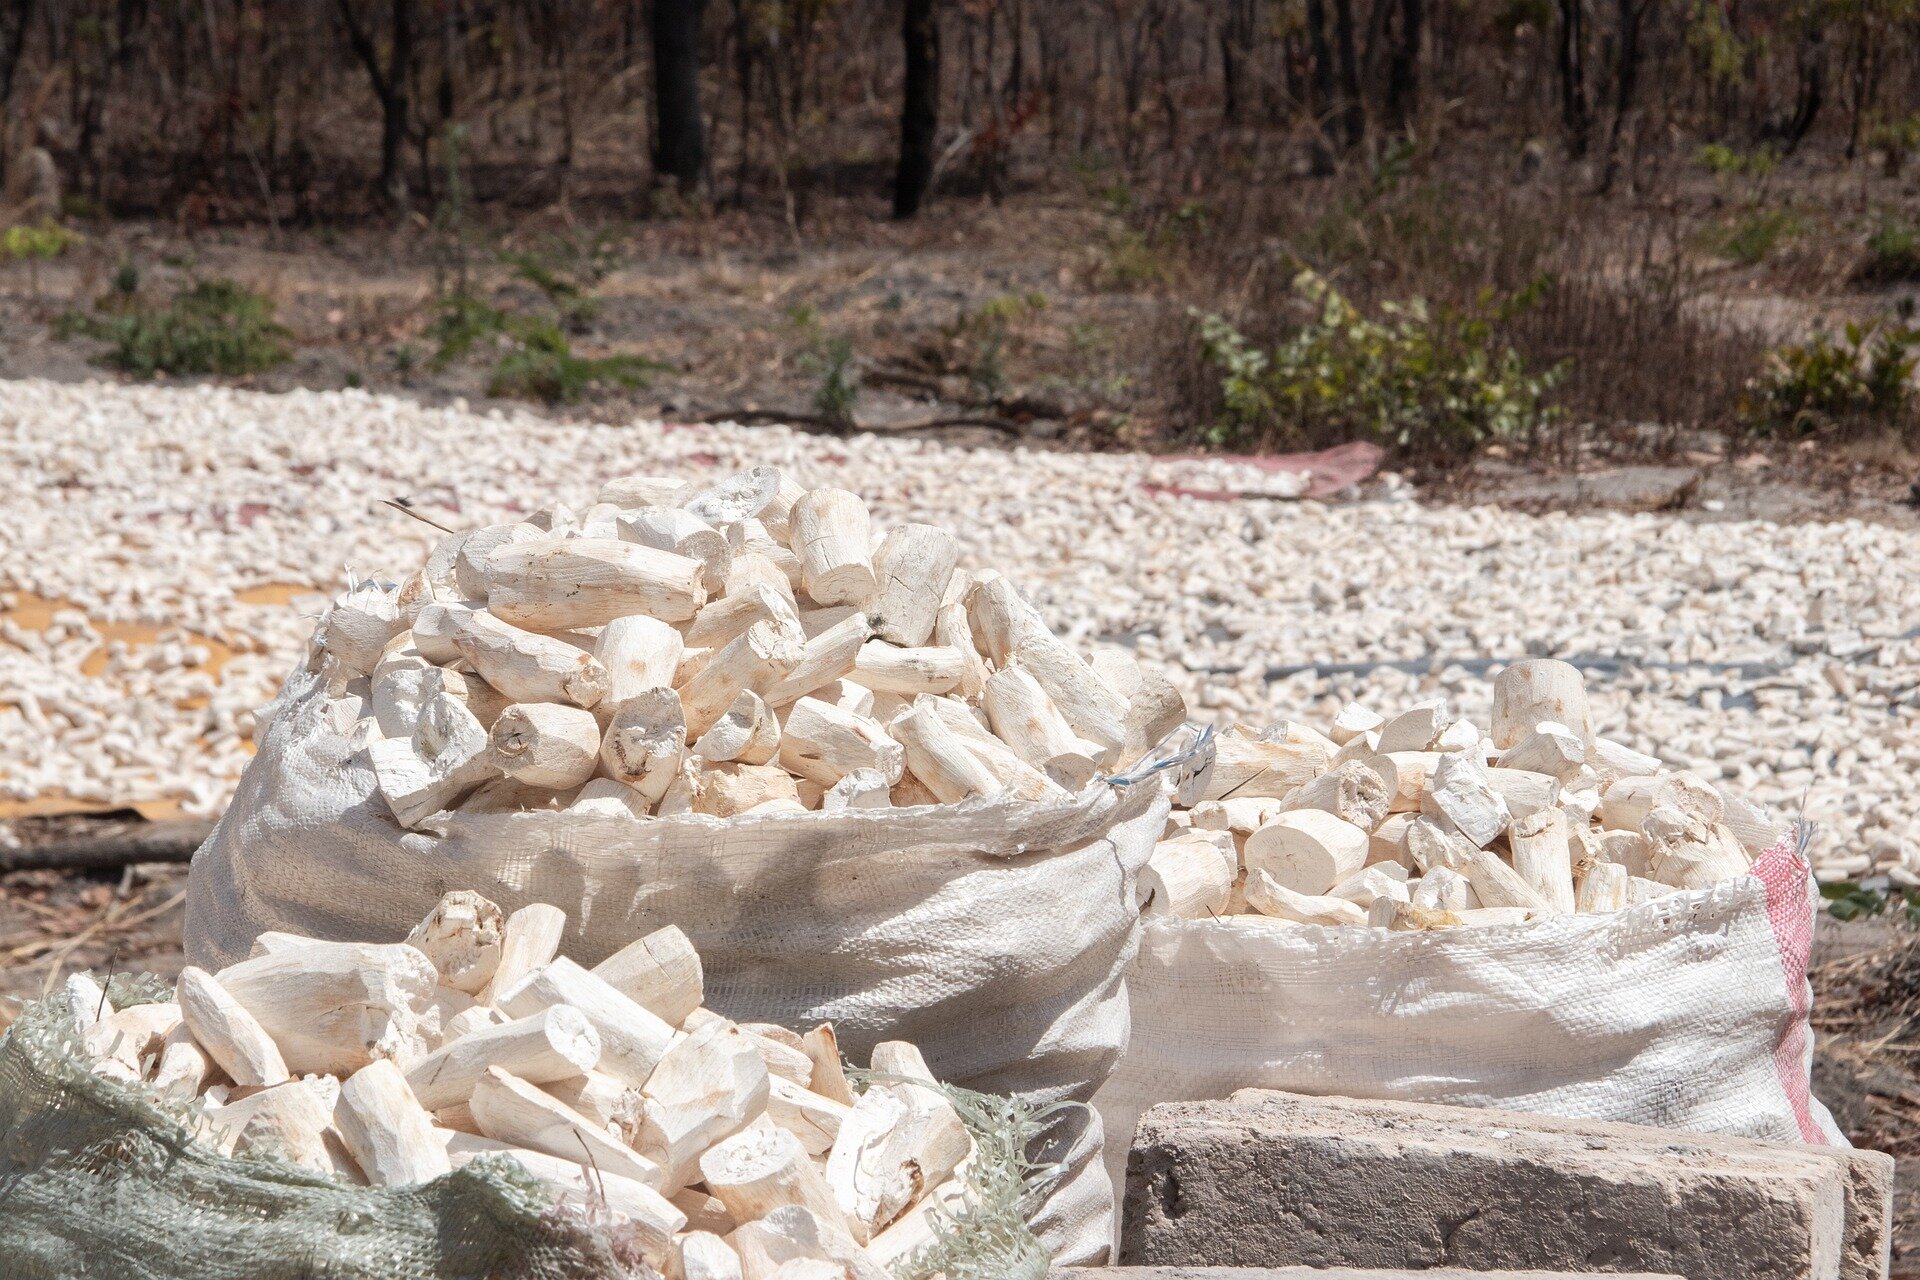 photo of Cassava: The perilous past and promising future of a toxic but nourishing crop image